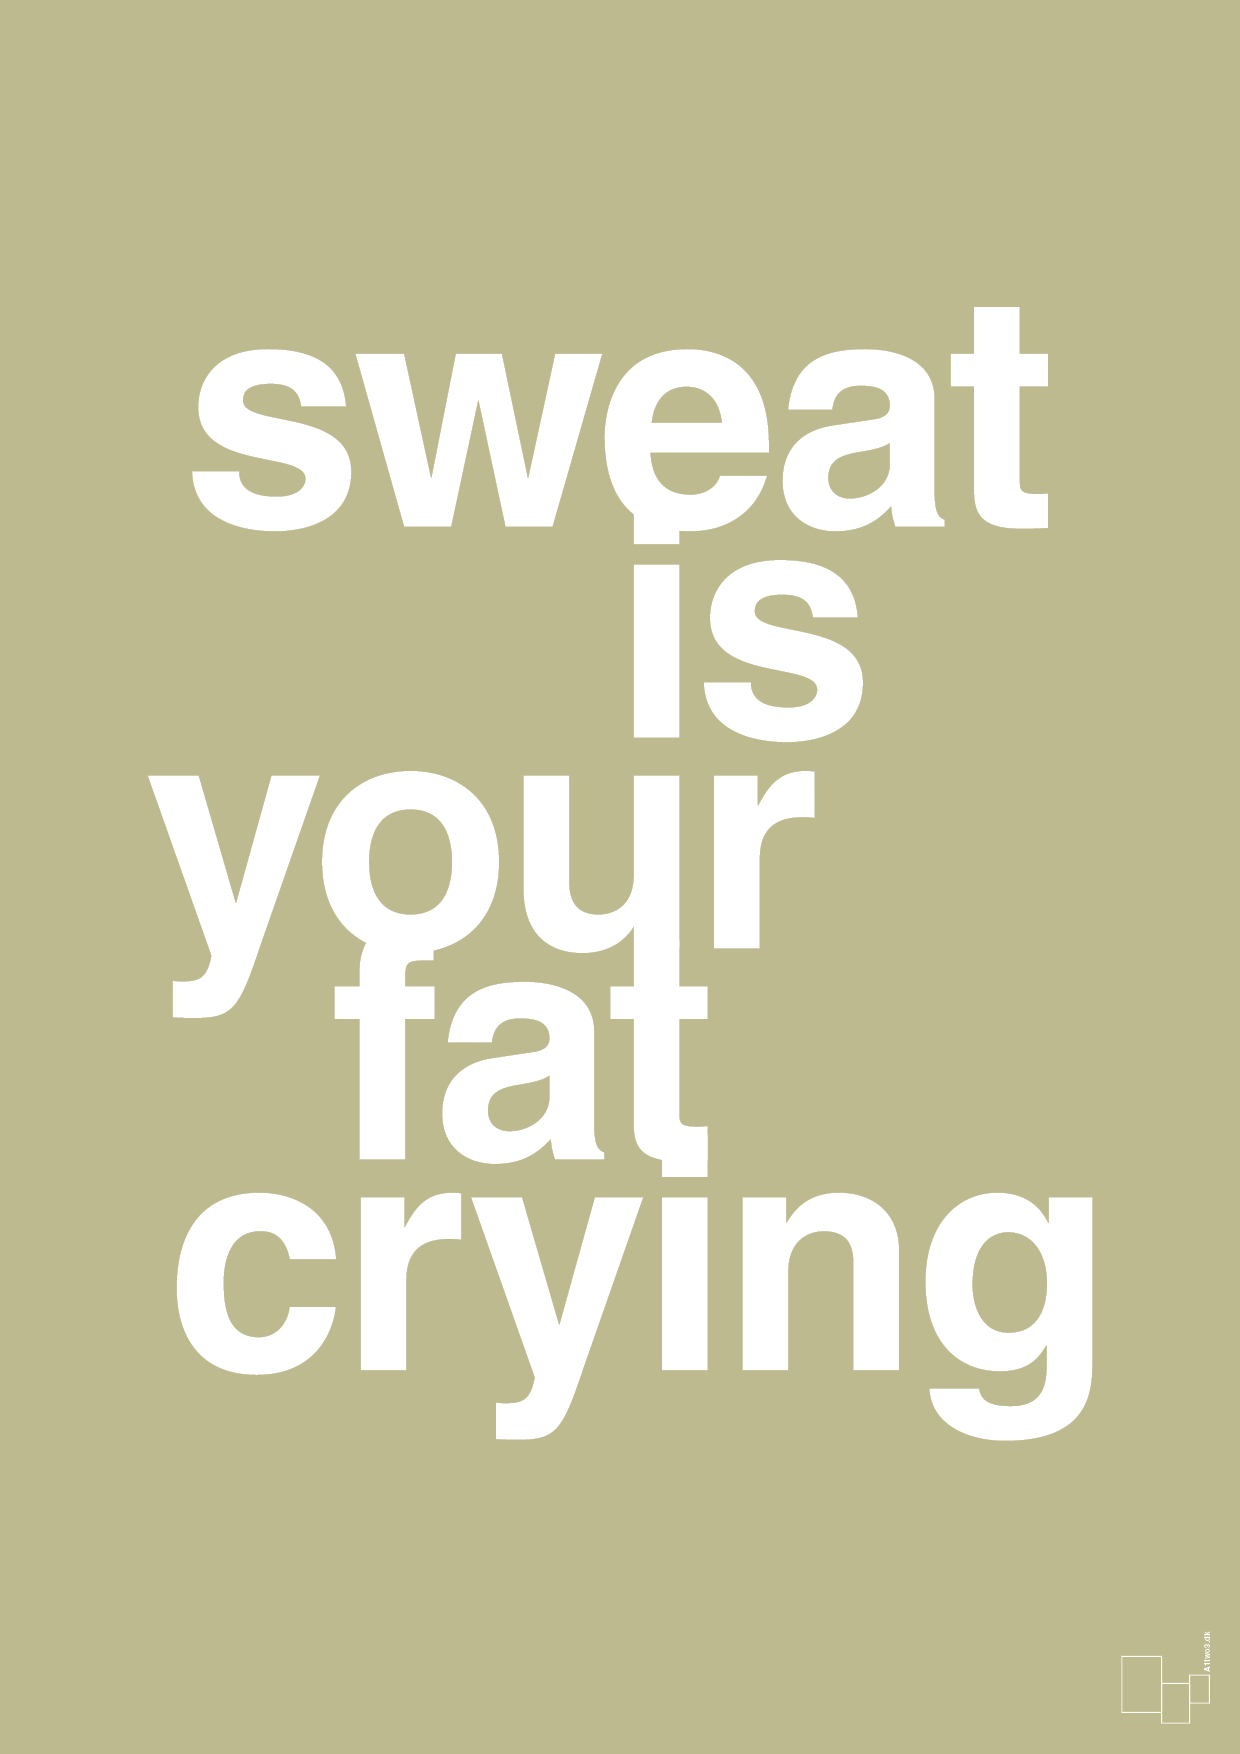 sweat is your fat crying - Plakat med Sport & Fritid i Back to Nature